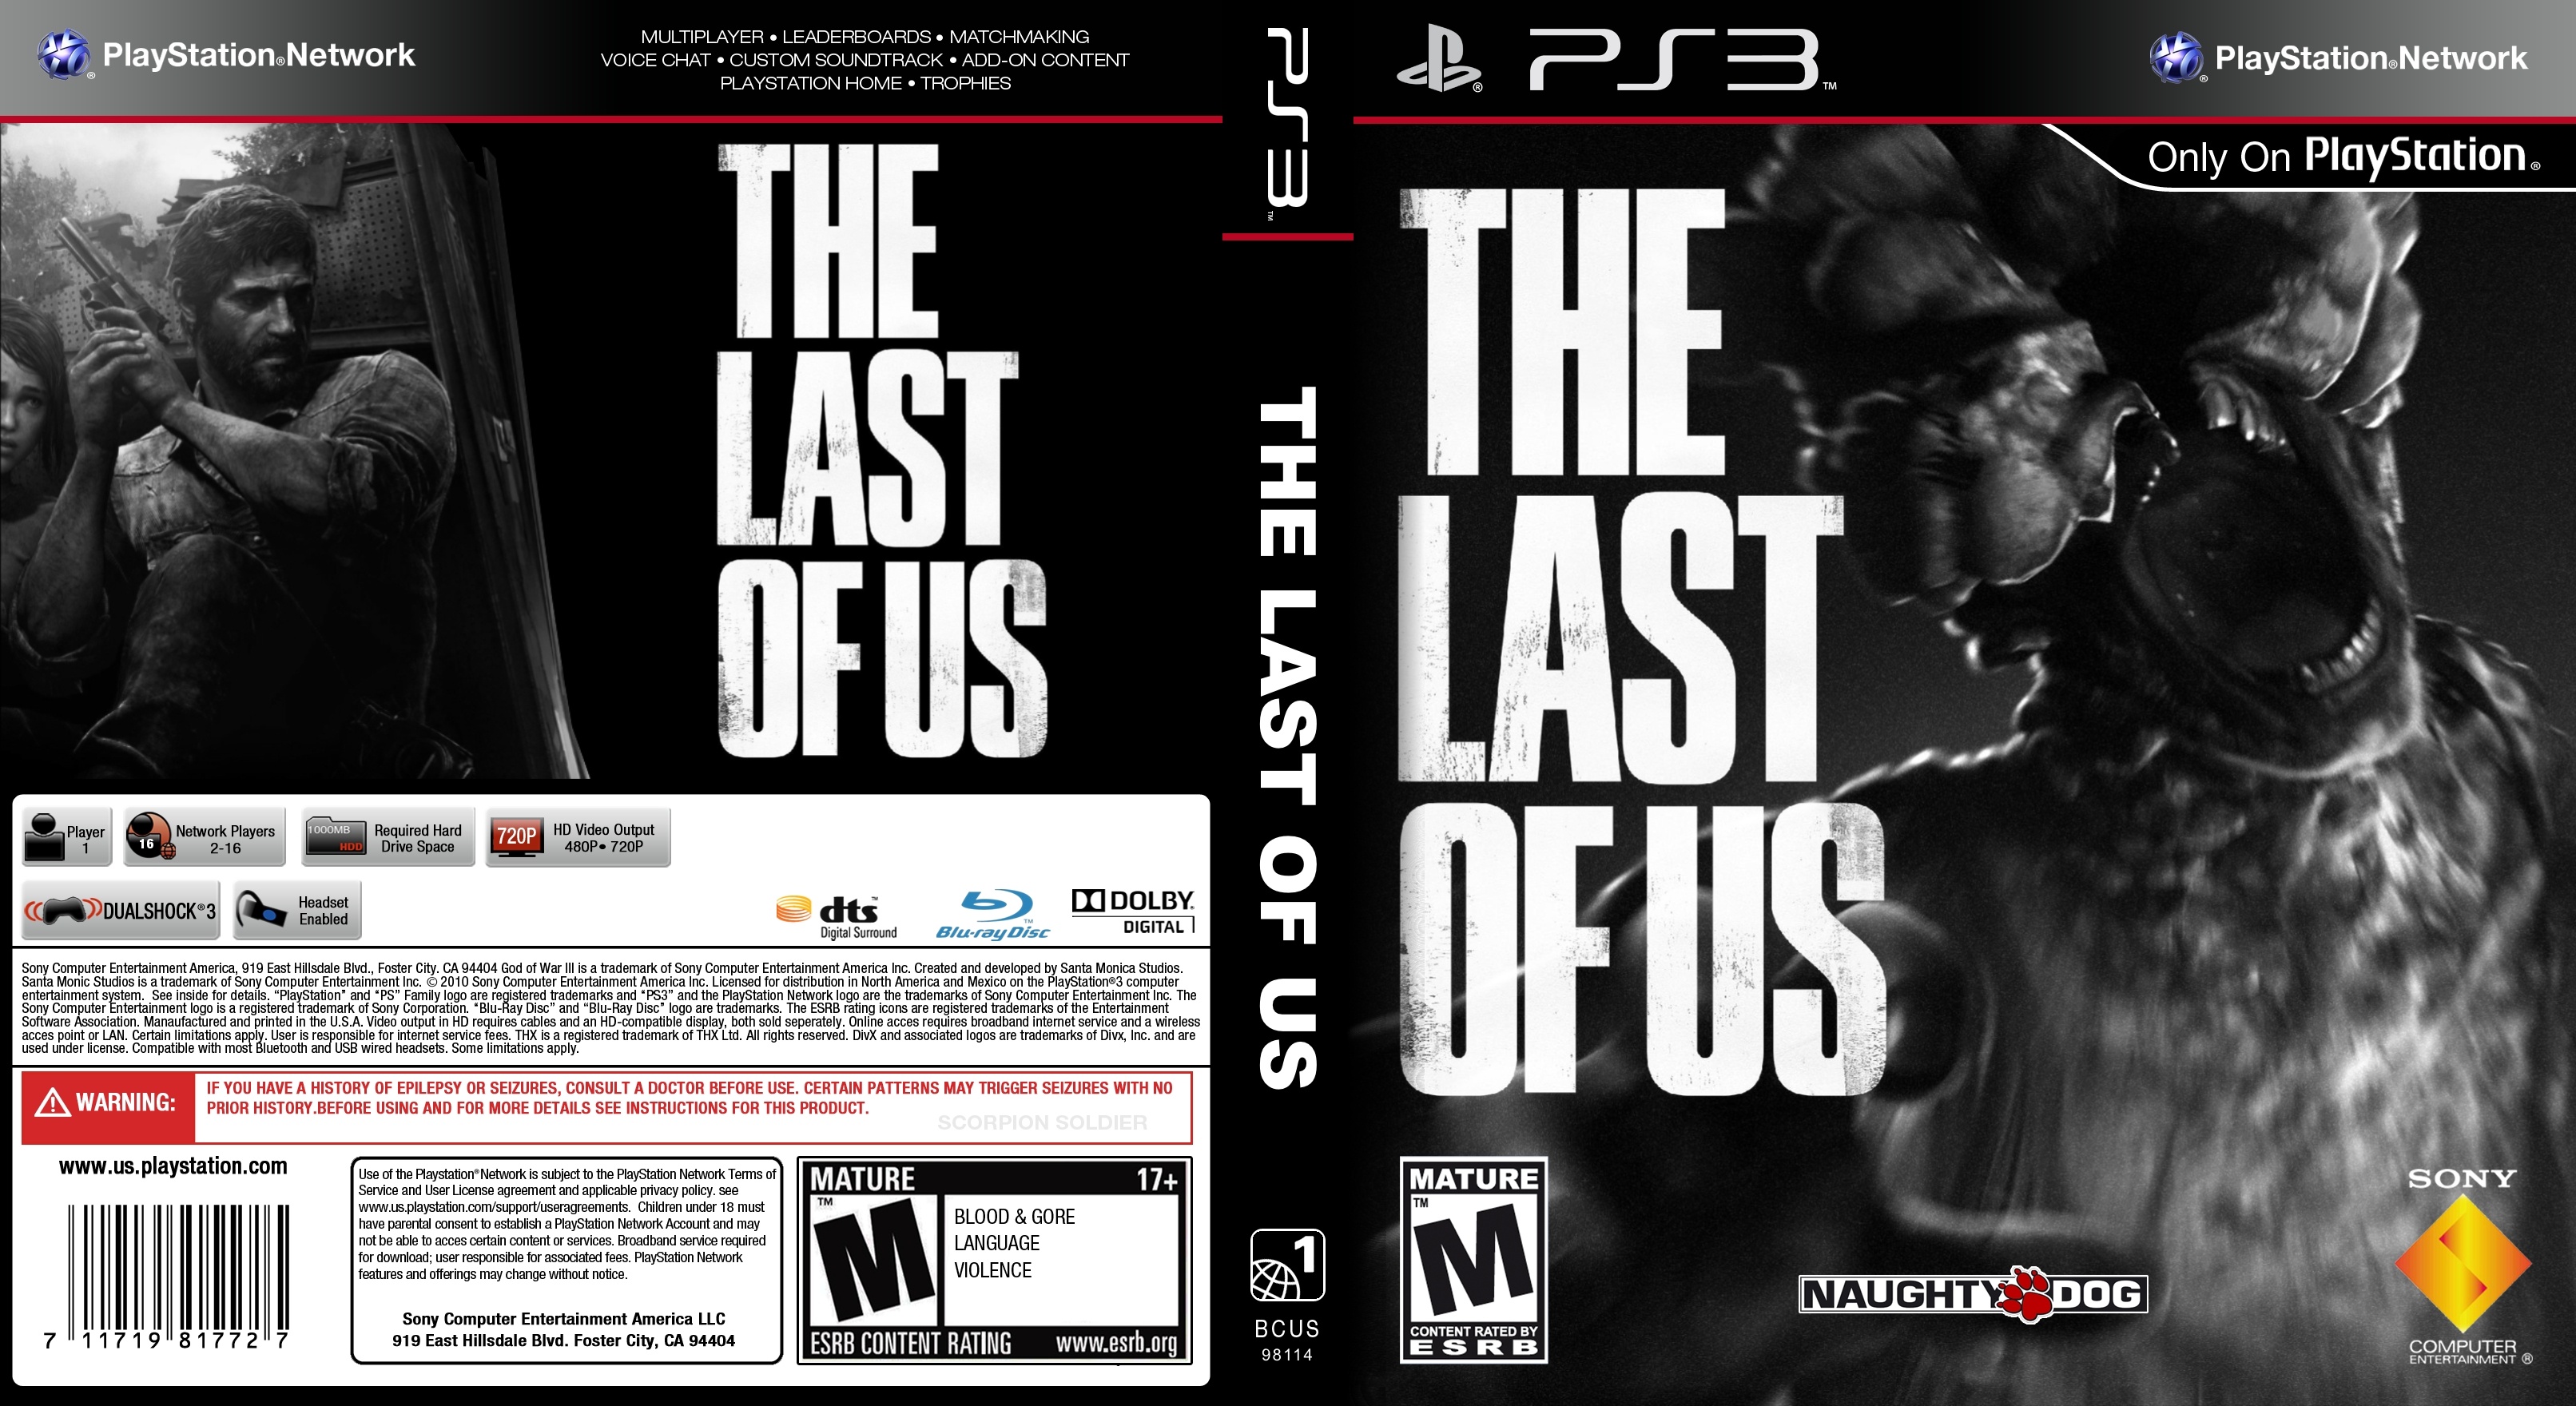 Last of Us, The (PS3) - The Cover Project